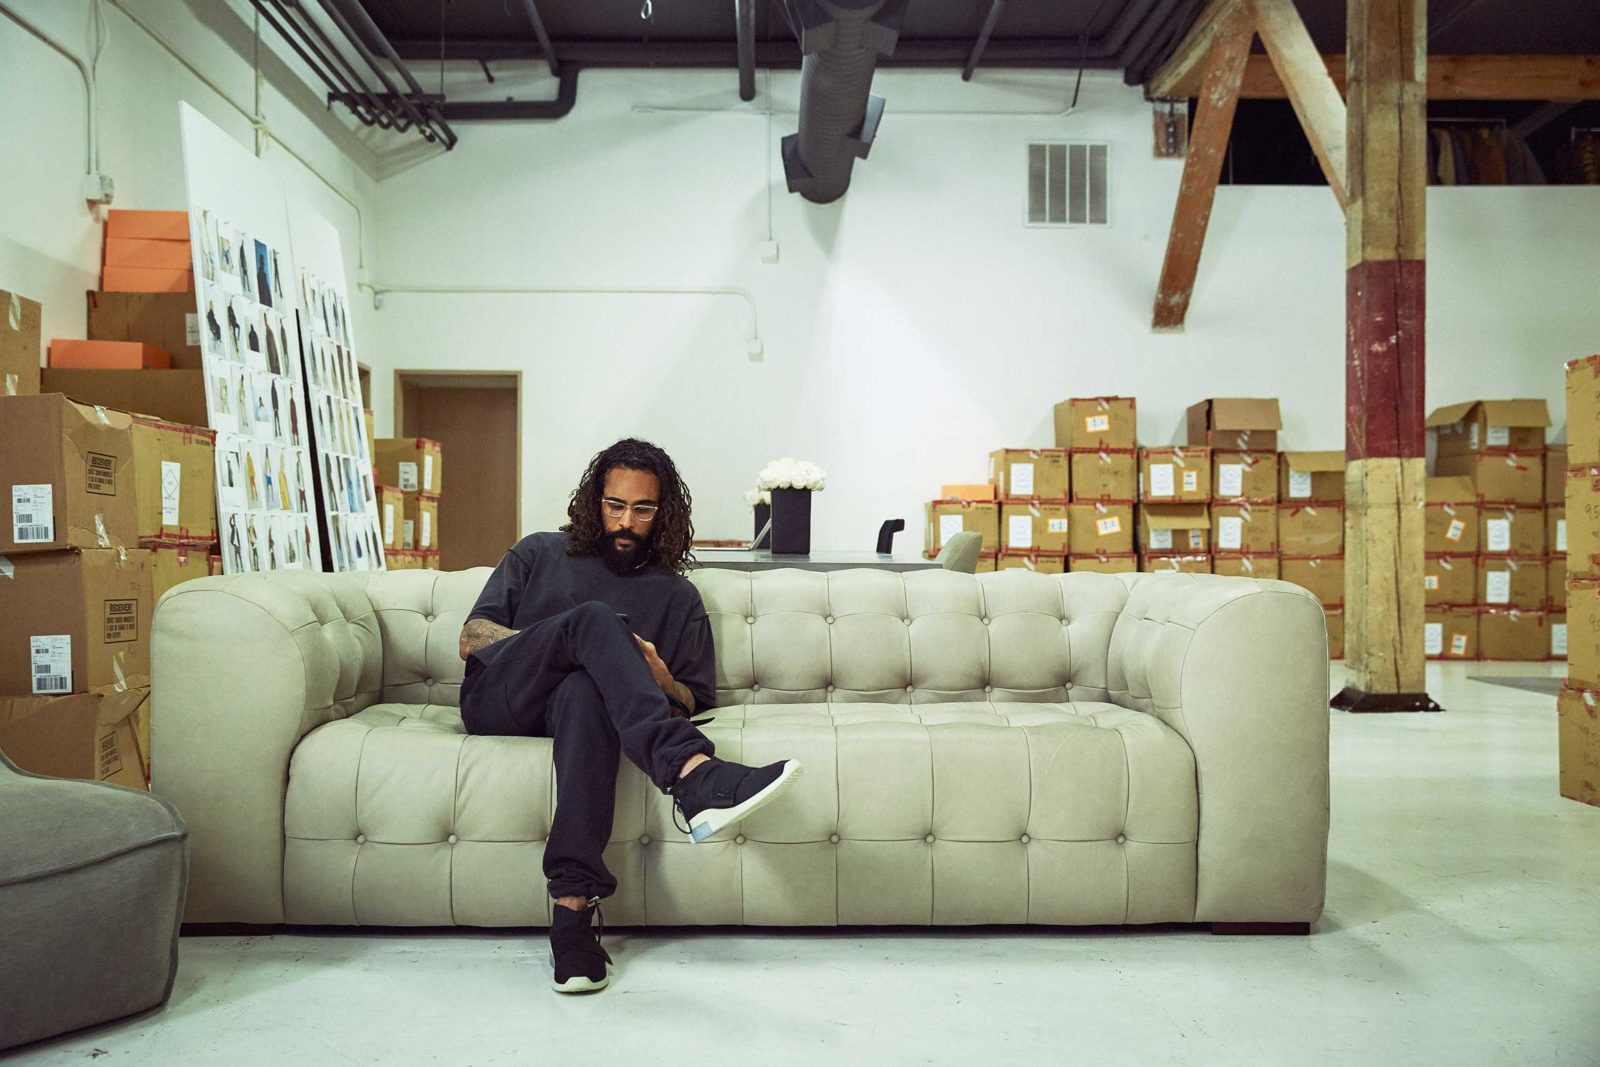 Will Jerry Lorenzo and Fear of God be able to bring a bigger